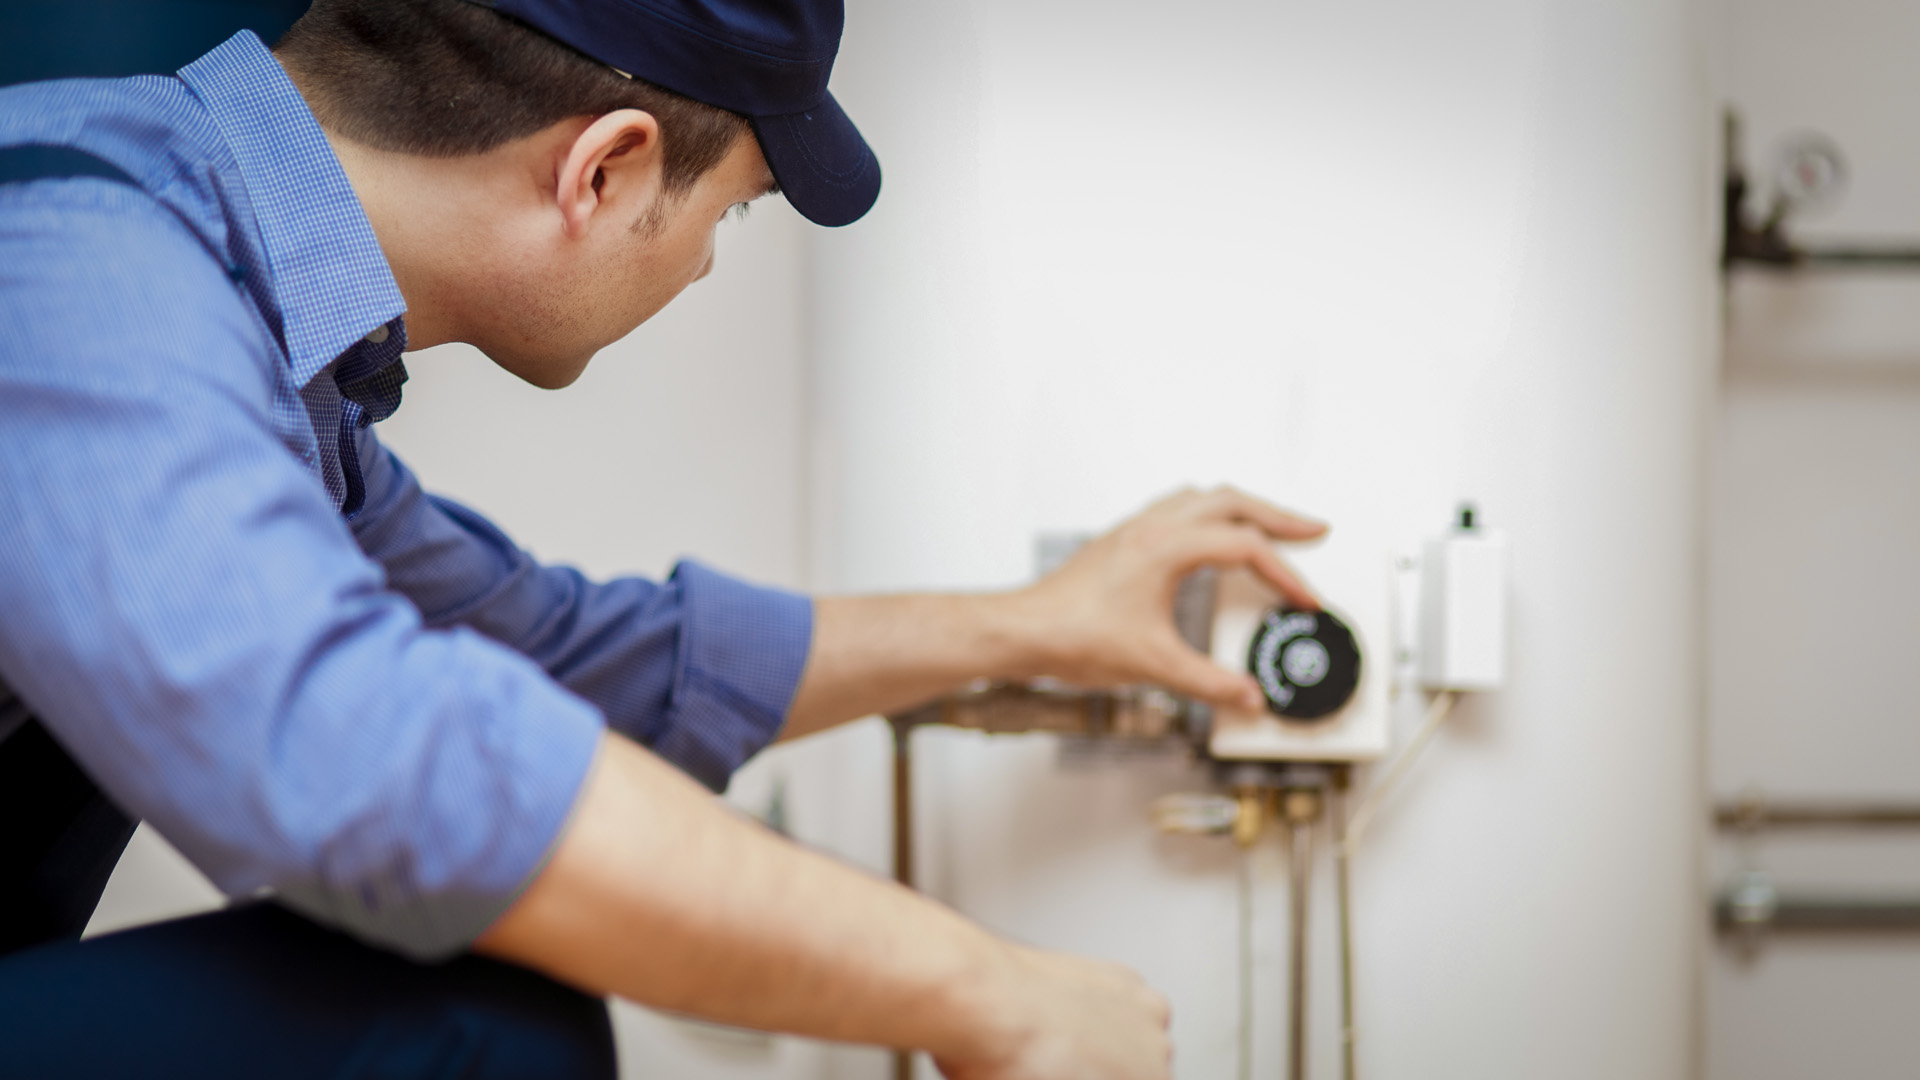 Featured image for “The Importance of Hot Water Heater Inspections with Renner Home Inspection Services in Abilene, Texas”